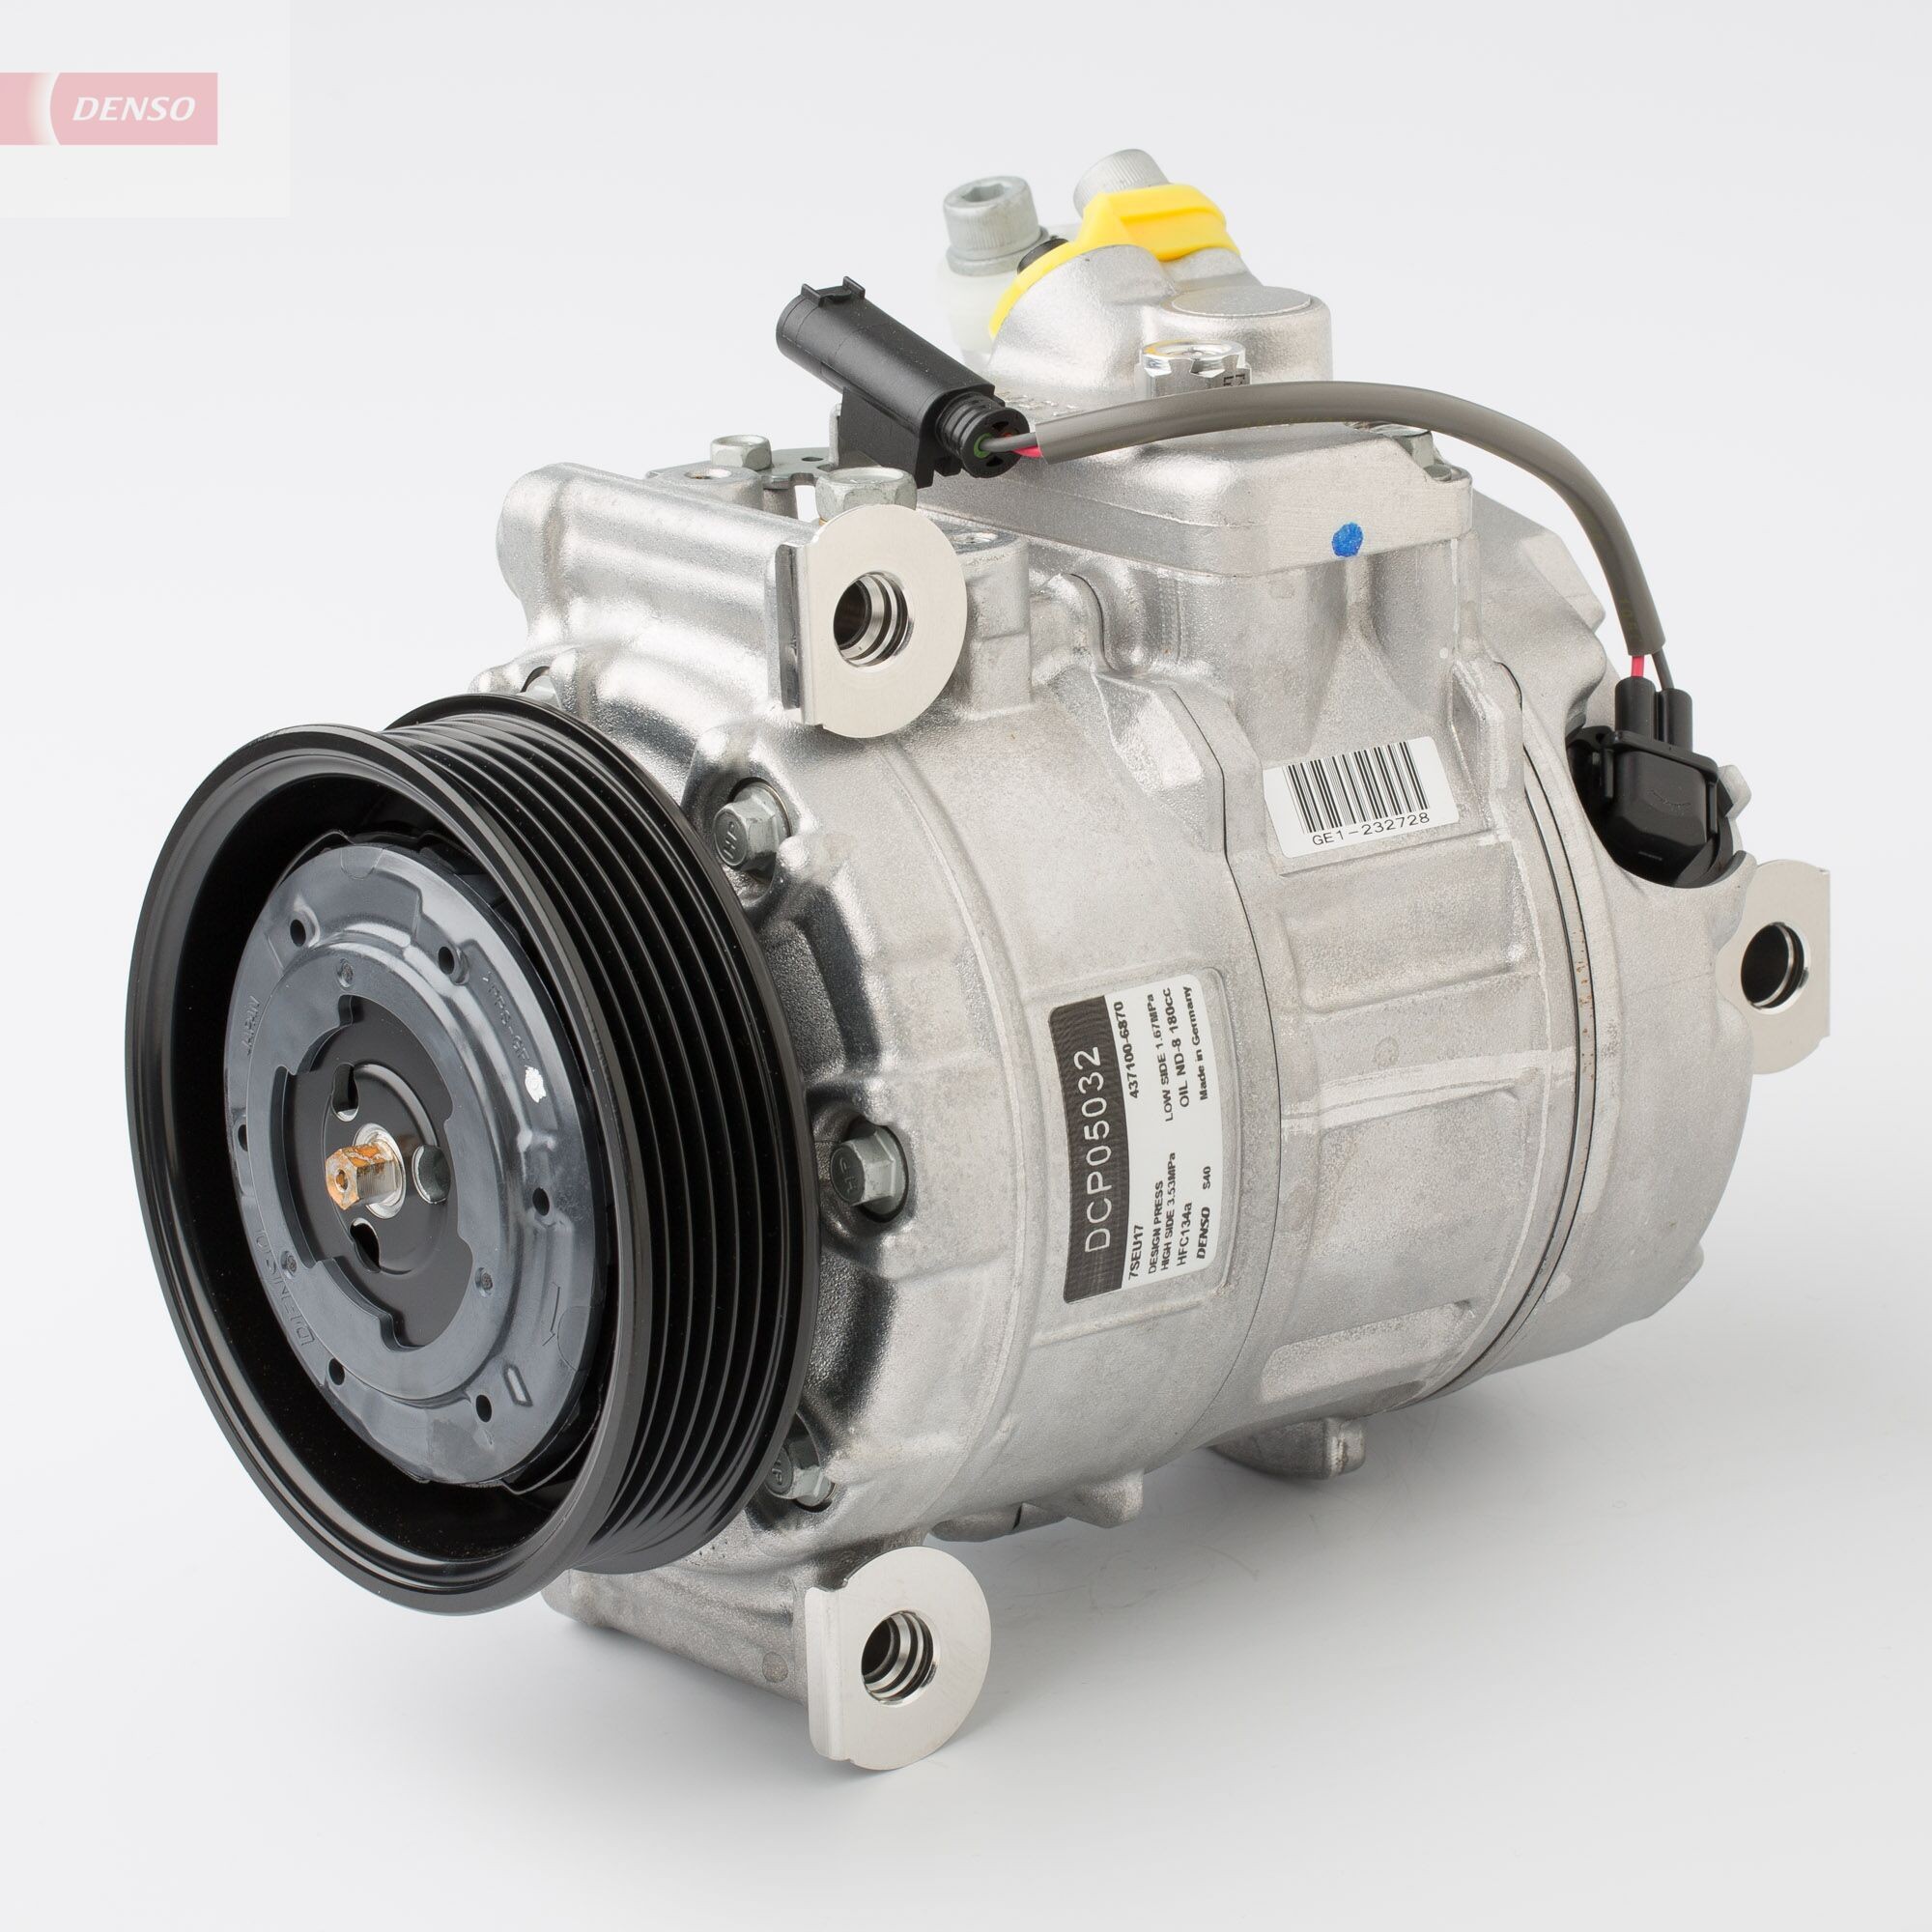 DENSO Air conditioning compressor DCP05032 BMW 5 Series 2005